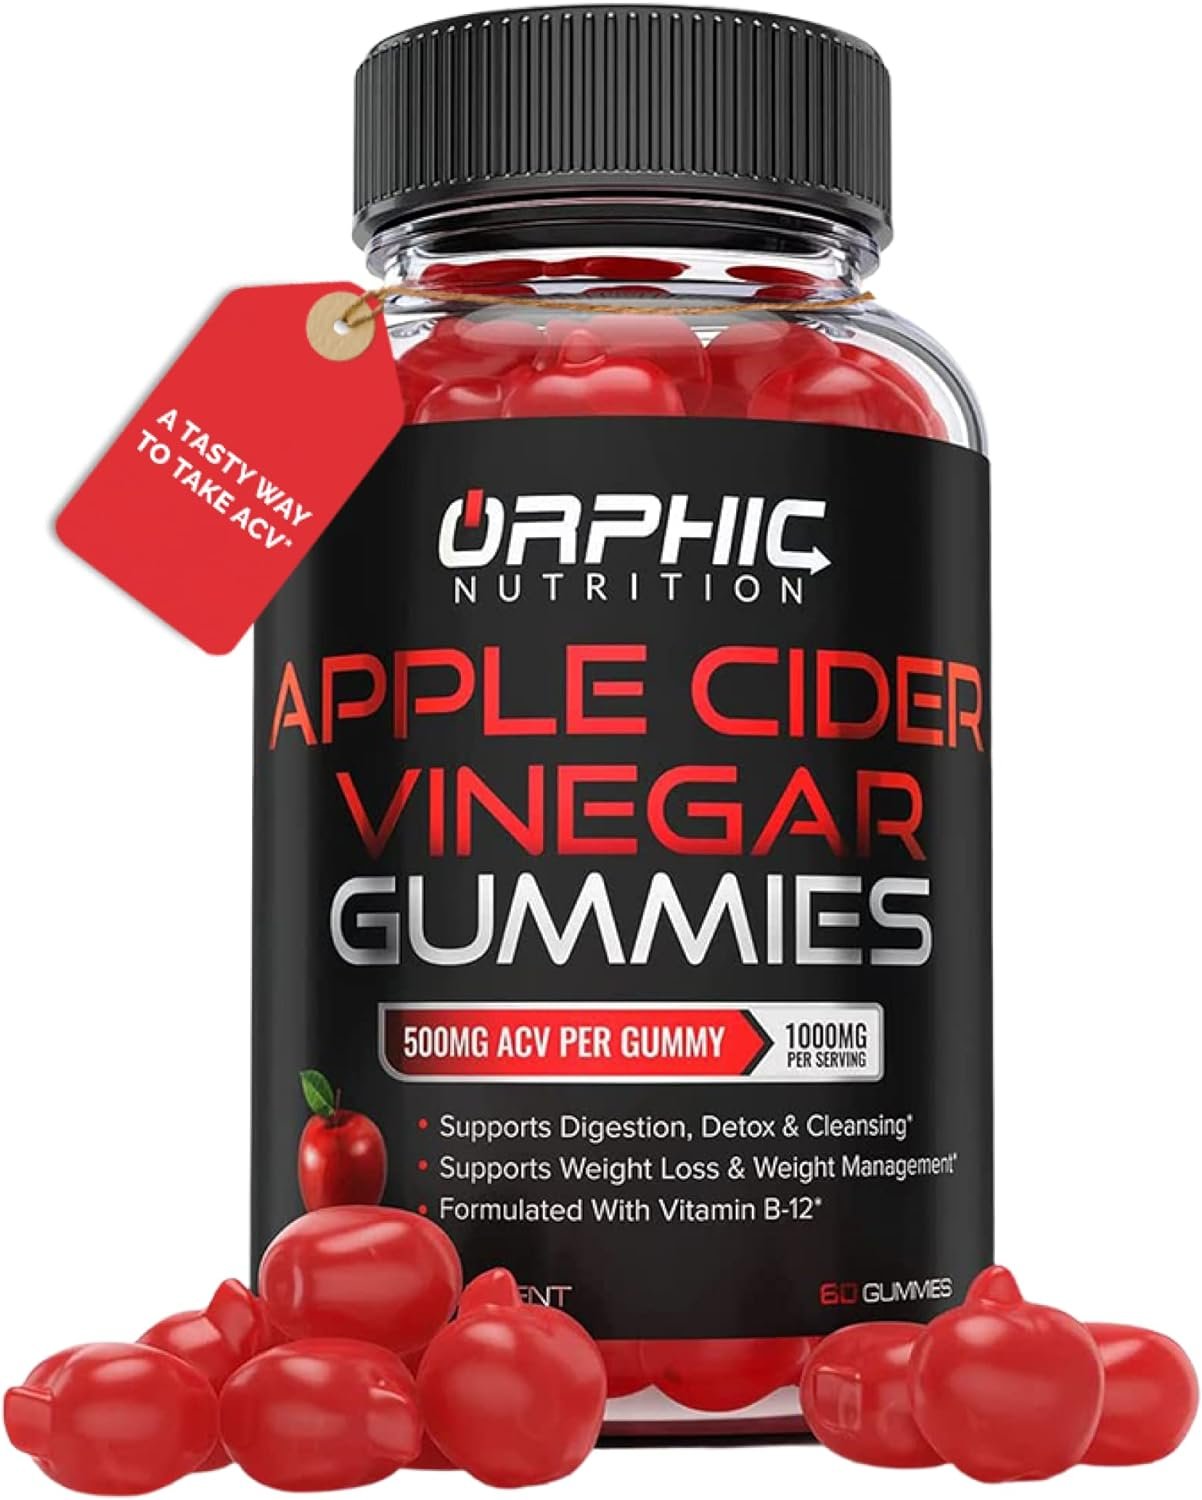 Apple Cider Vinegar Gummies - 1000mg - Formulated to Support Weight Loss Efforts Gut Health* - Supports Digestion, Detox Cleansing* - ACV Gummies W/VIT B12, Beetroot Pomegranate (60 Gummies)